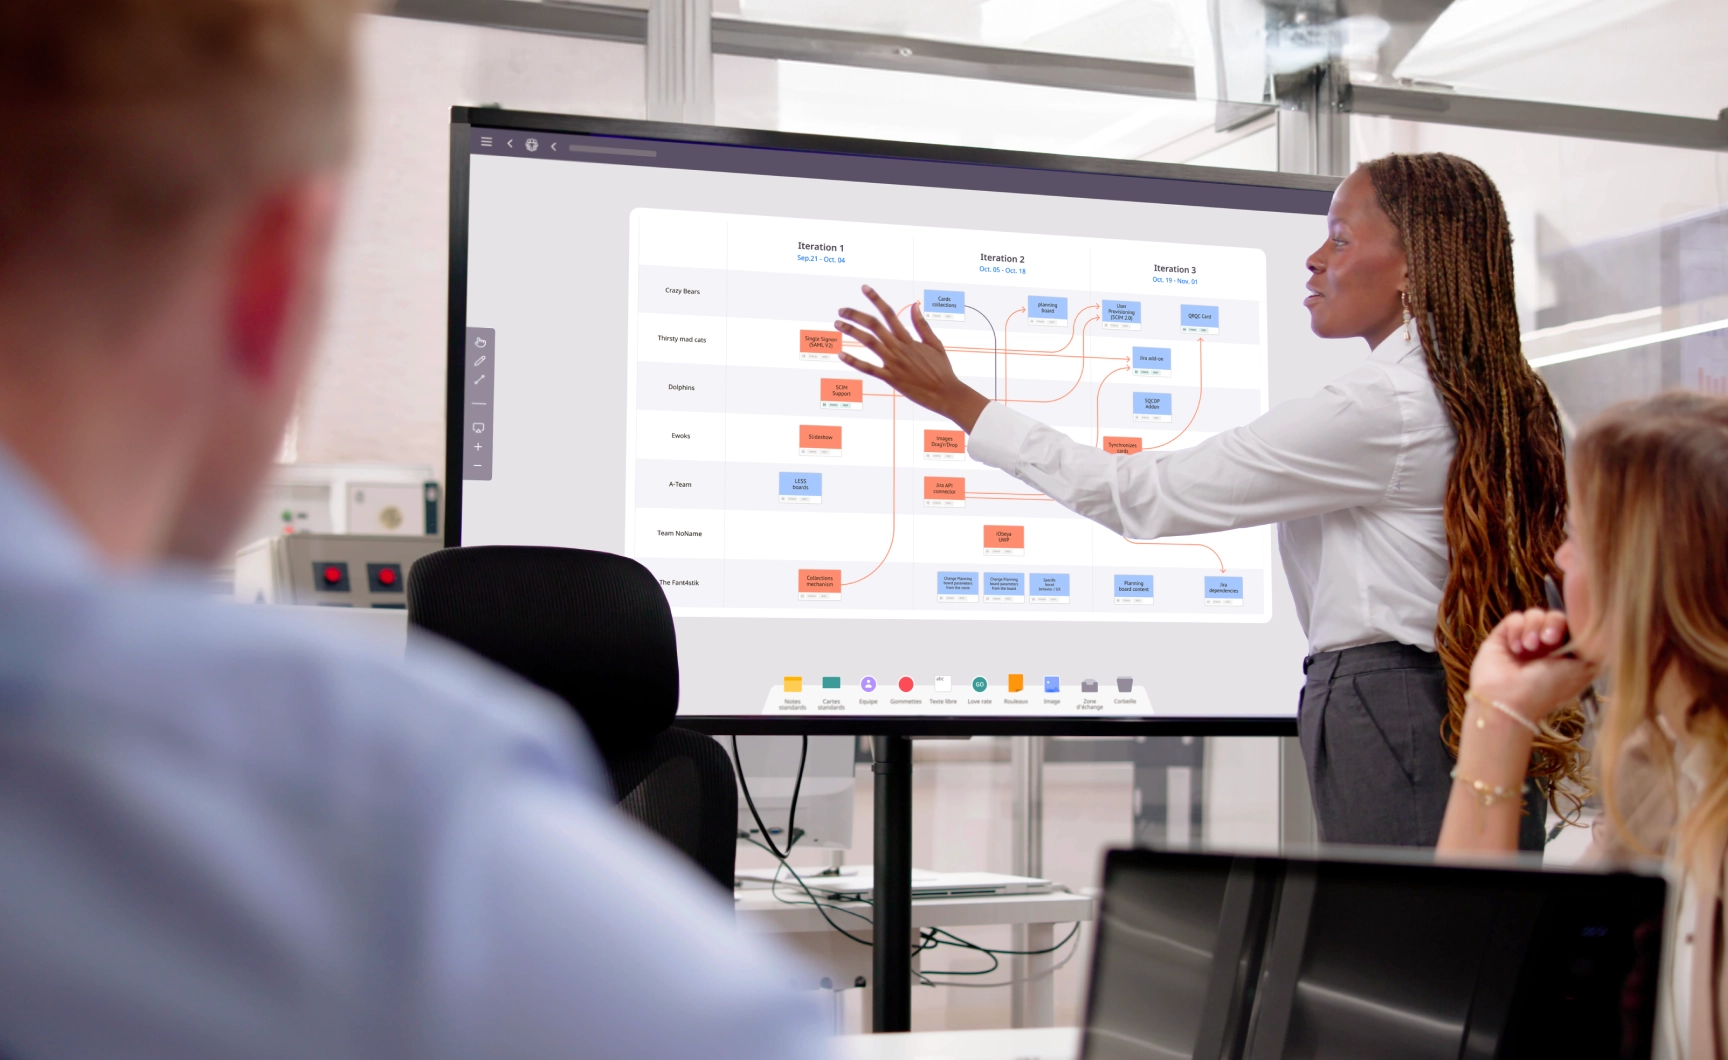 Professional using a visual collaboration tool called Obeya on digital screen showing work across many iterations. This tool enhance their existing Agile practices.